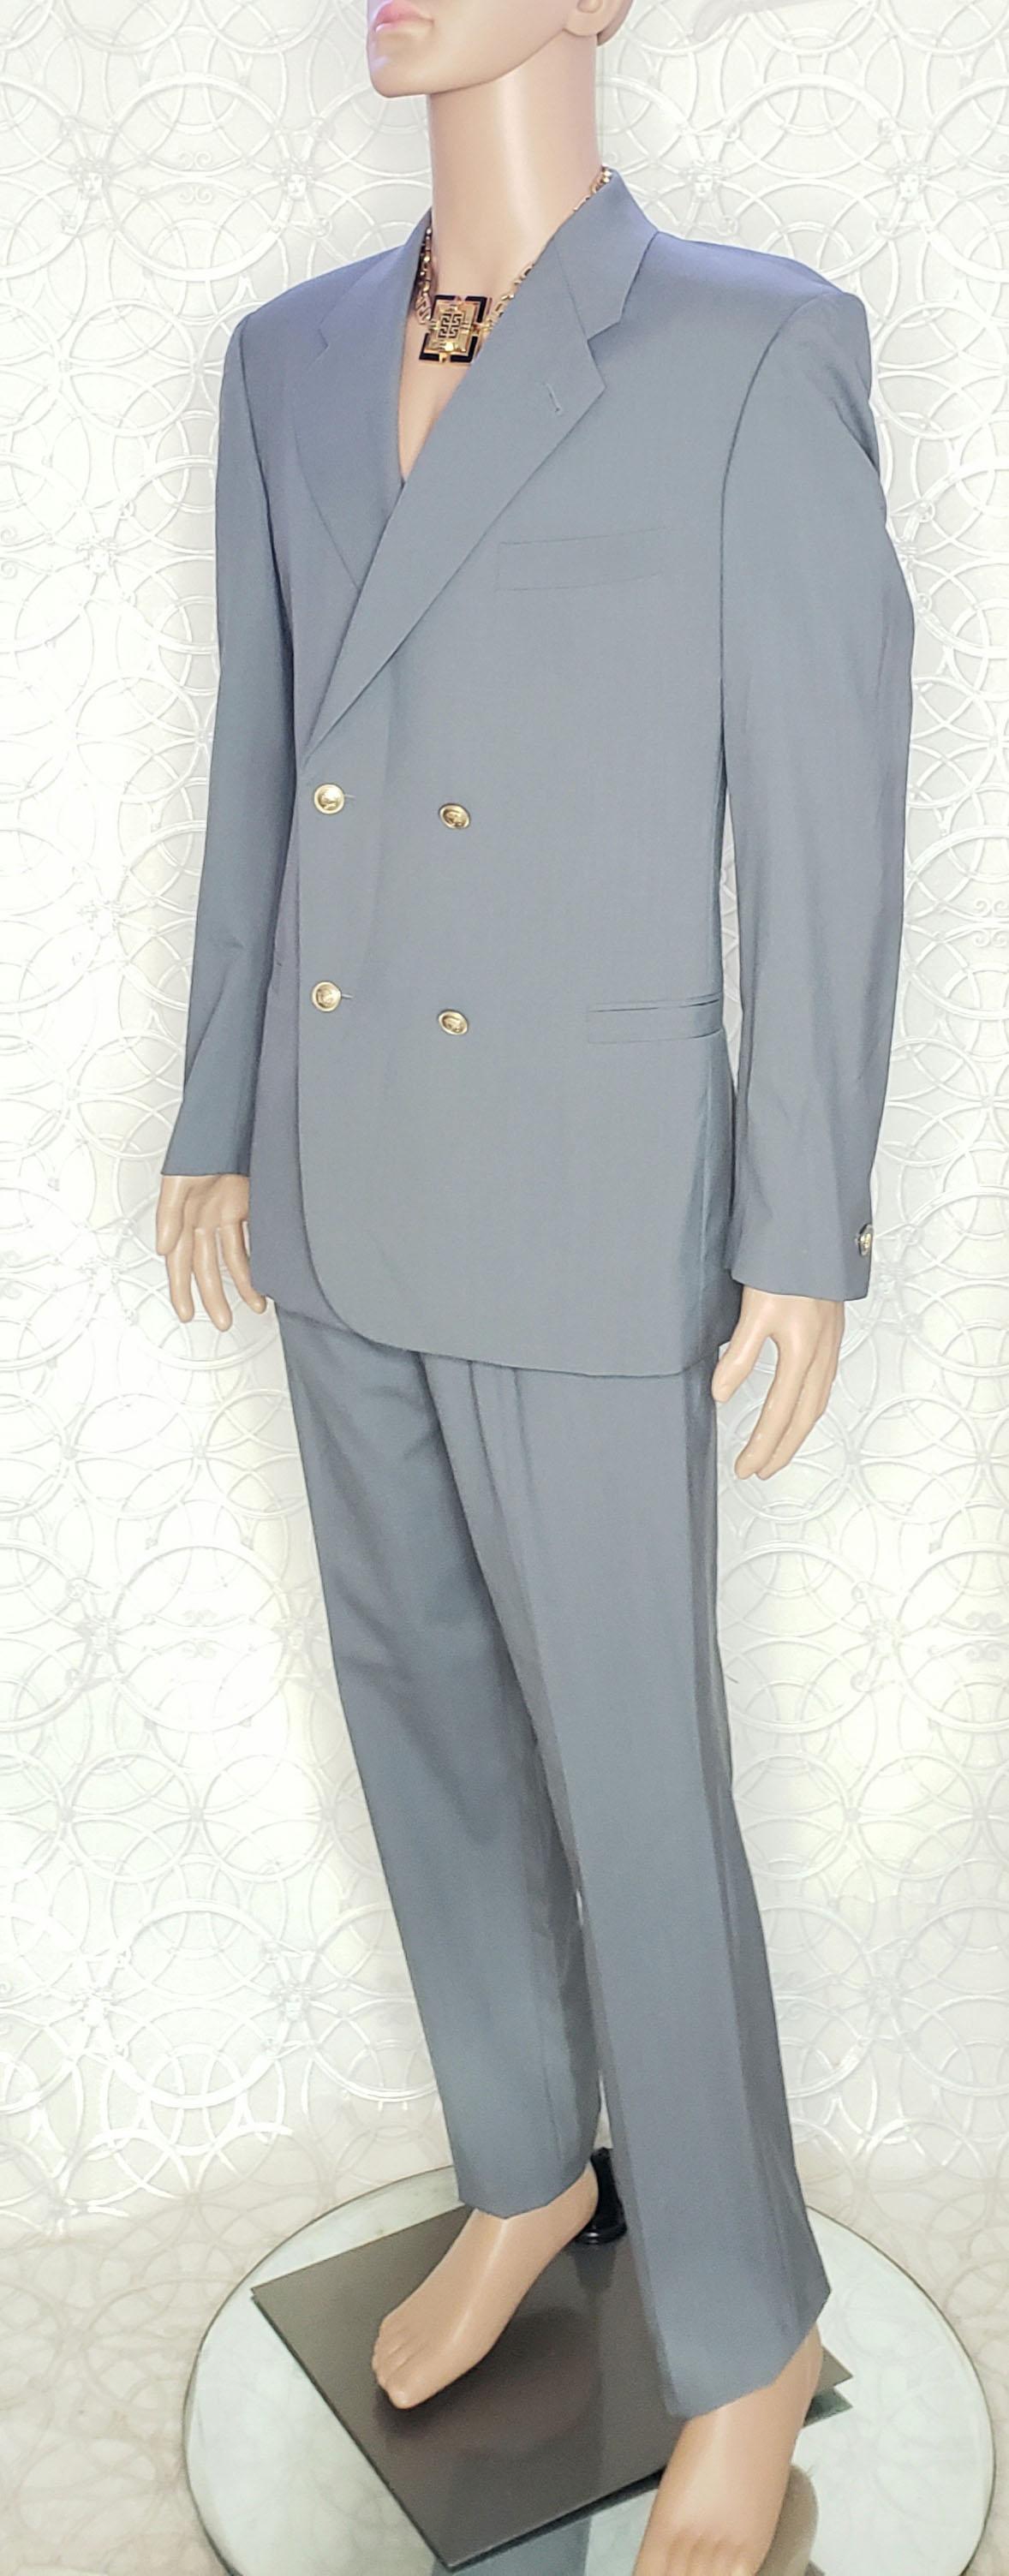 Gray VERSACE S/S 2012 look # 30 BRAND NEW GRAY SUIT 48 - 38 (M) For Sale